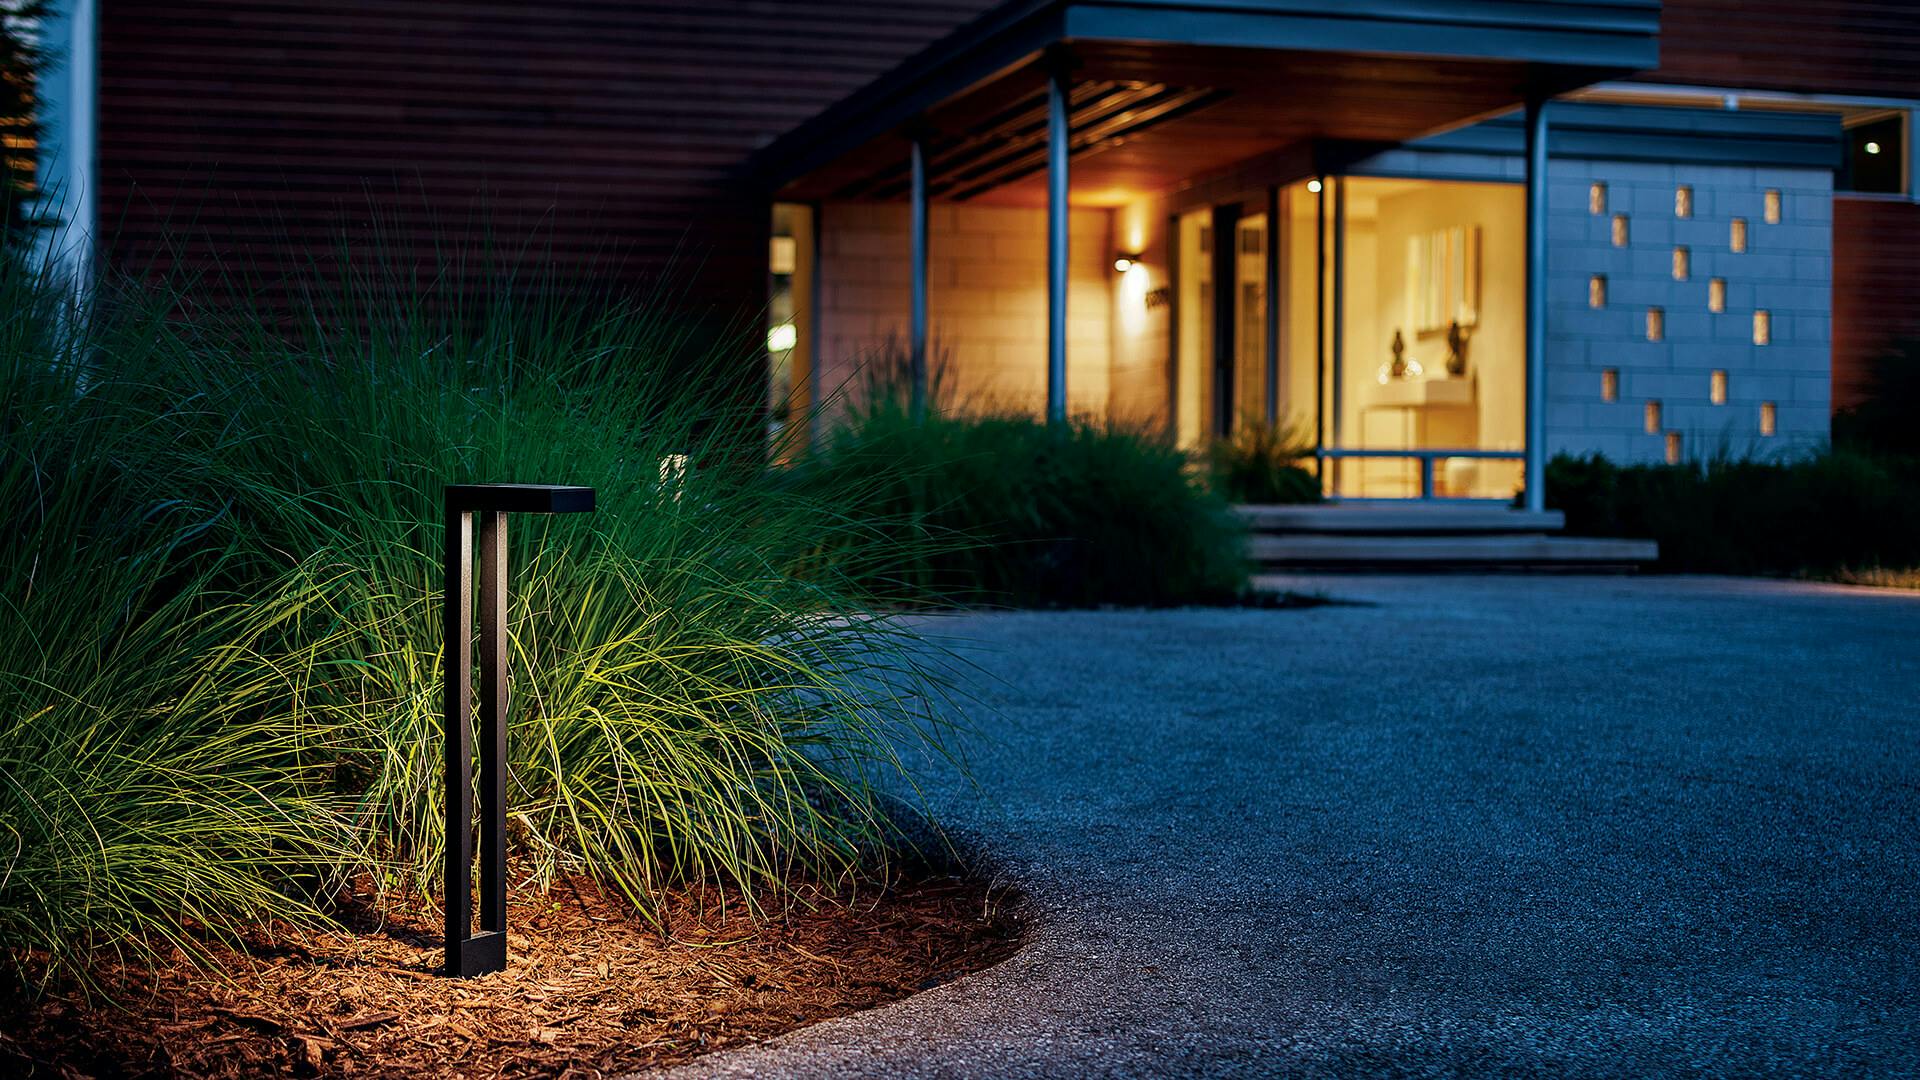 A contemporary path light illuminates part of a residential landscape with a house in the background